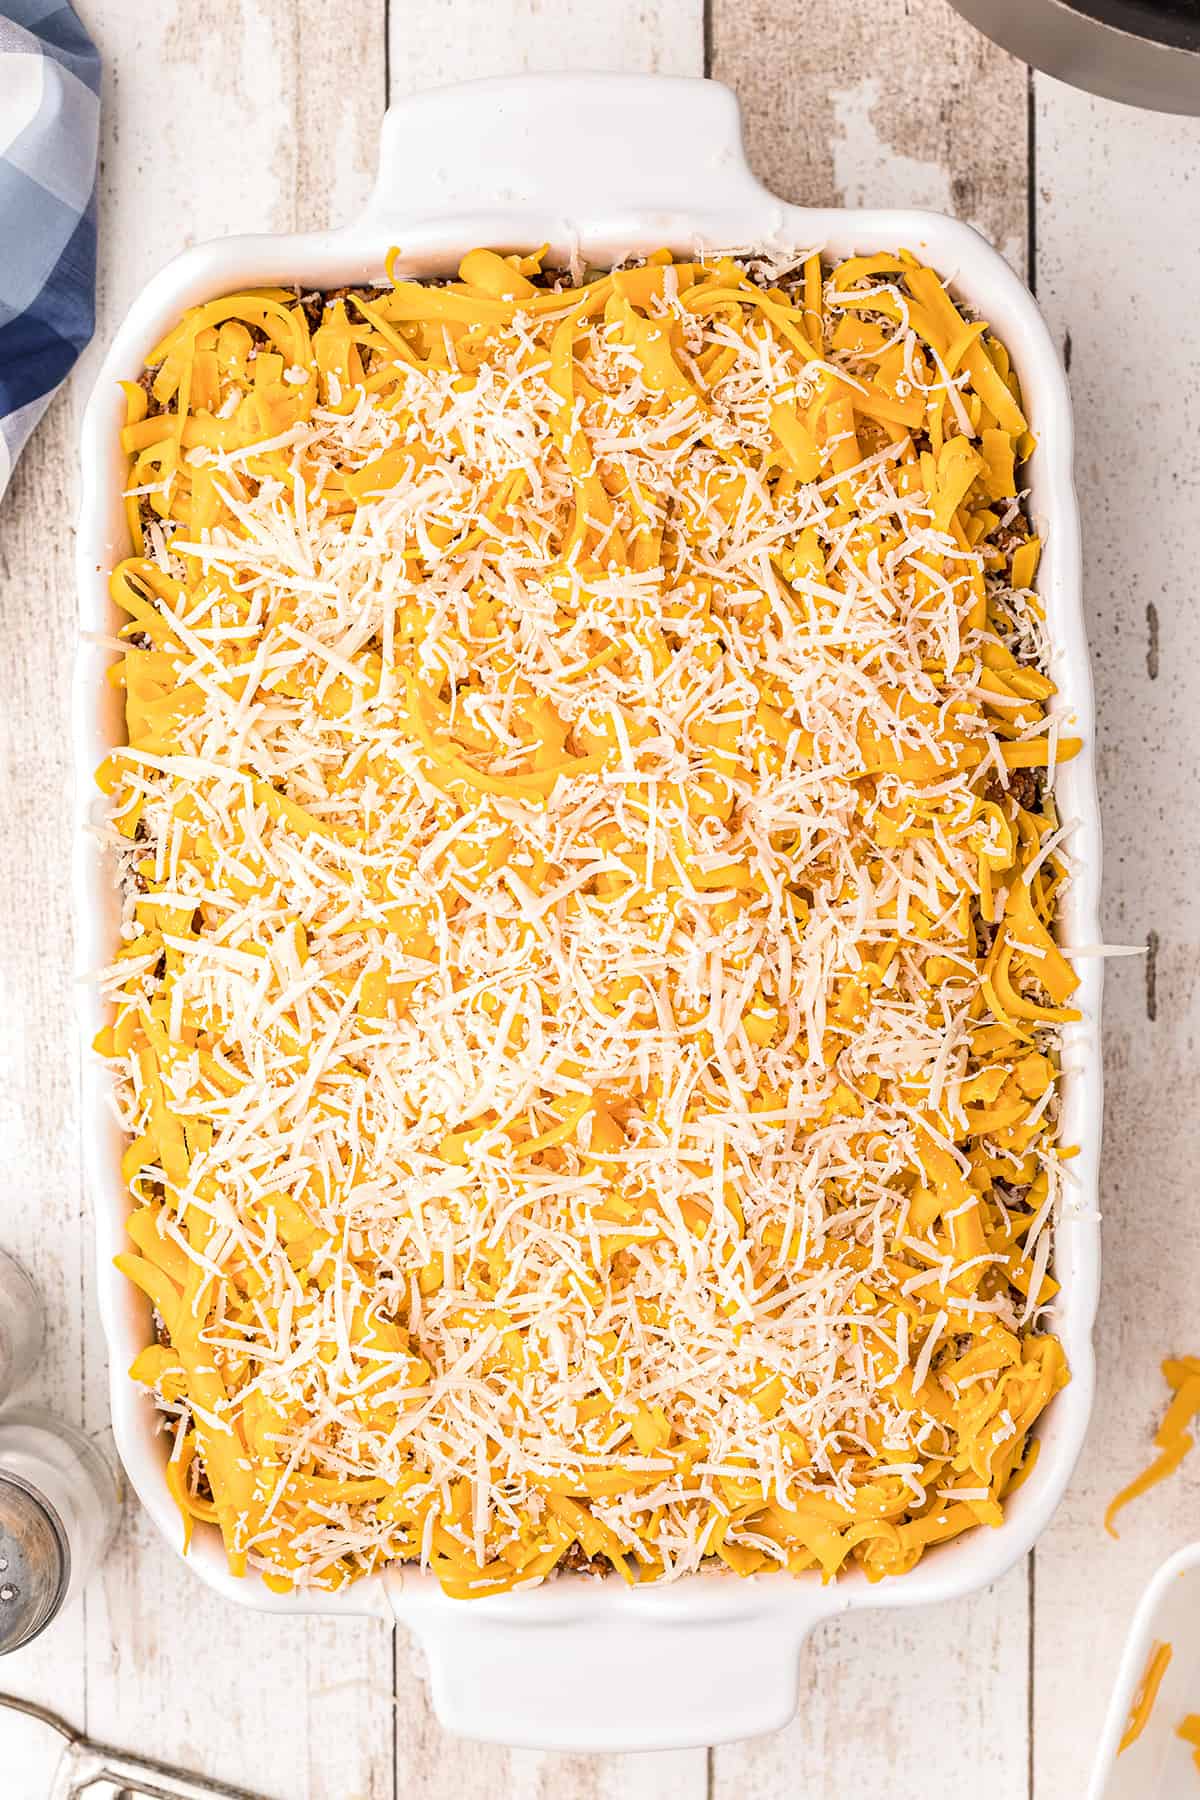 Completely assembled baked spaghetti in a casserole dish.